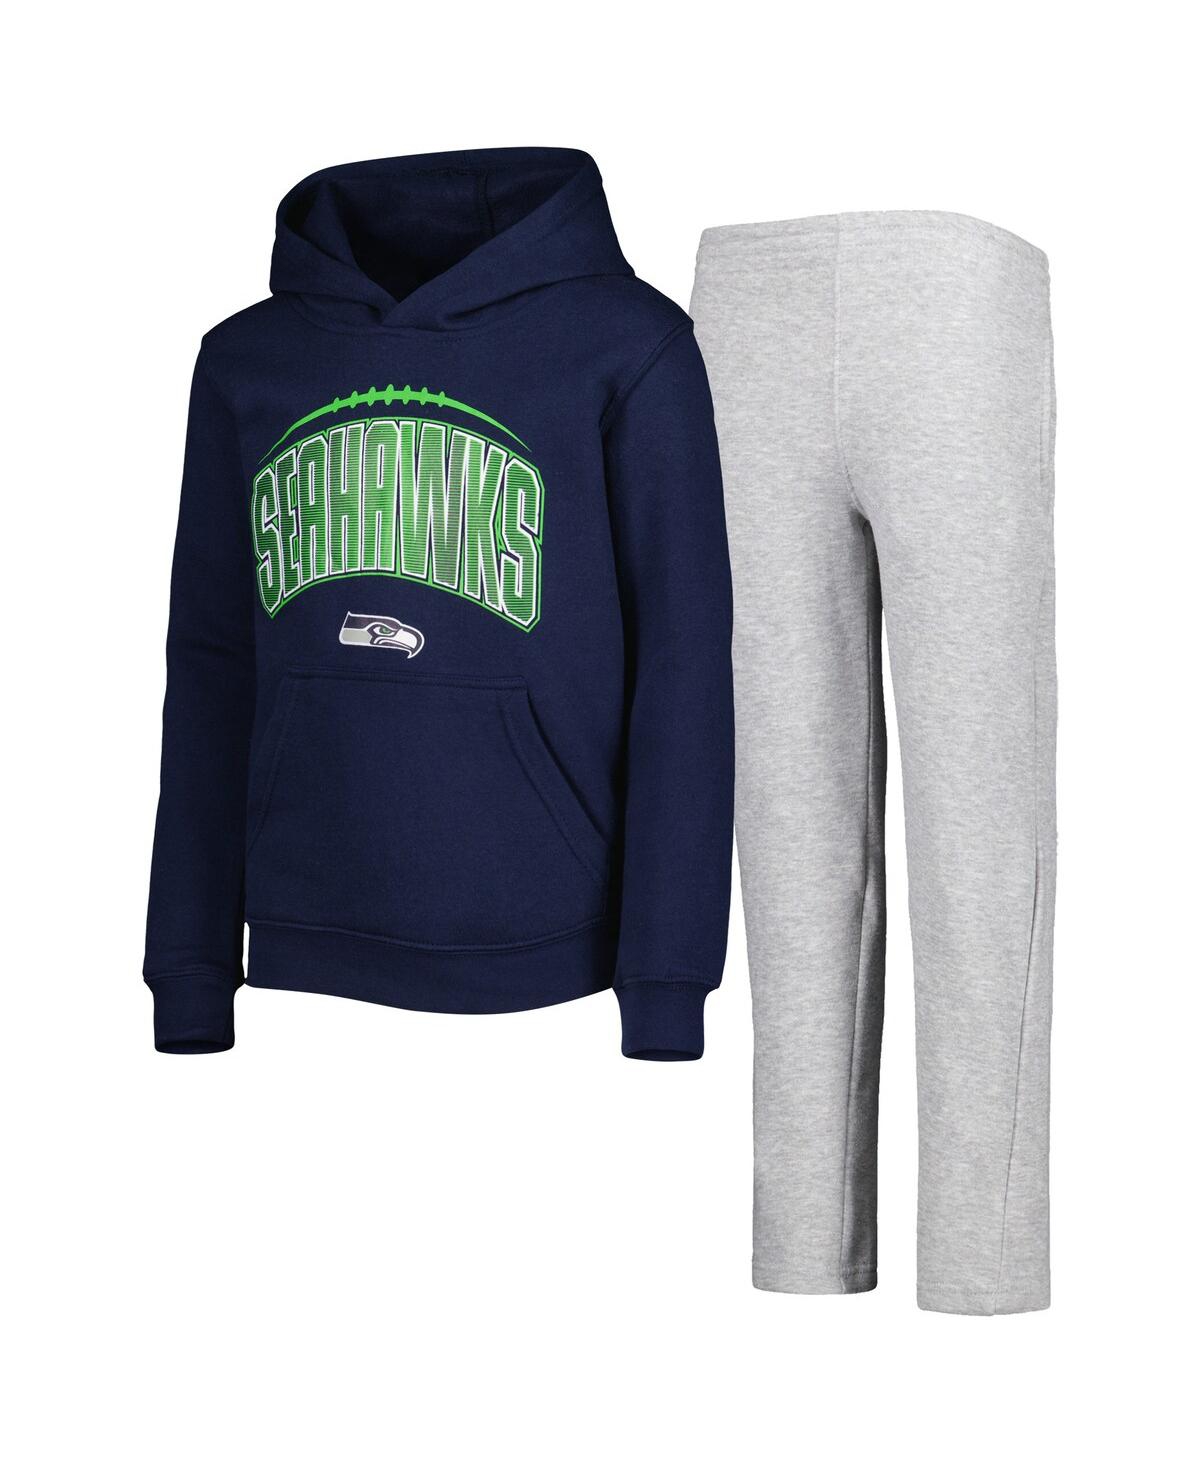 Outerstuff Kids' Big Boys College Navy, Heather Gray Seattle Seahawks Double Up Pullover Hoodie And Pants Set In Navy,heather Gray